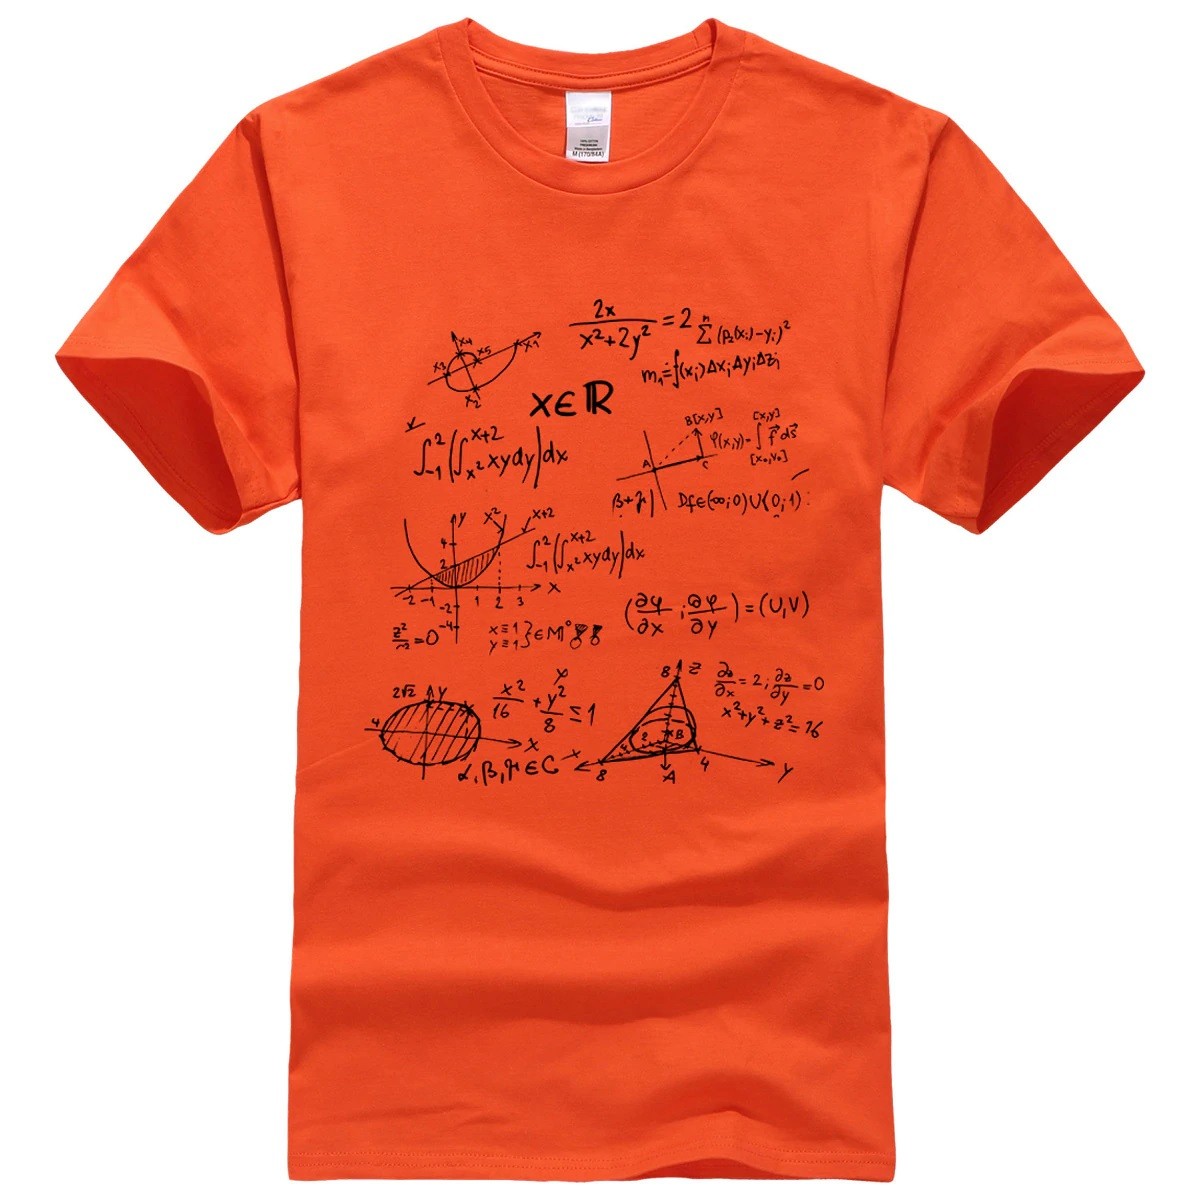 $12.75 - Calculus Equations T-Shirt - Tinkersphere